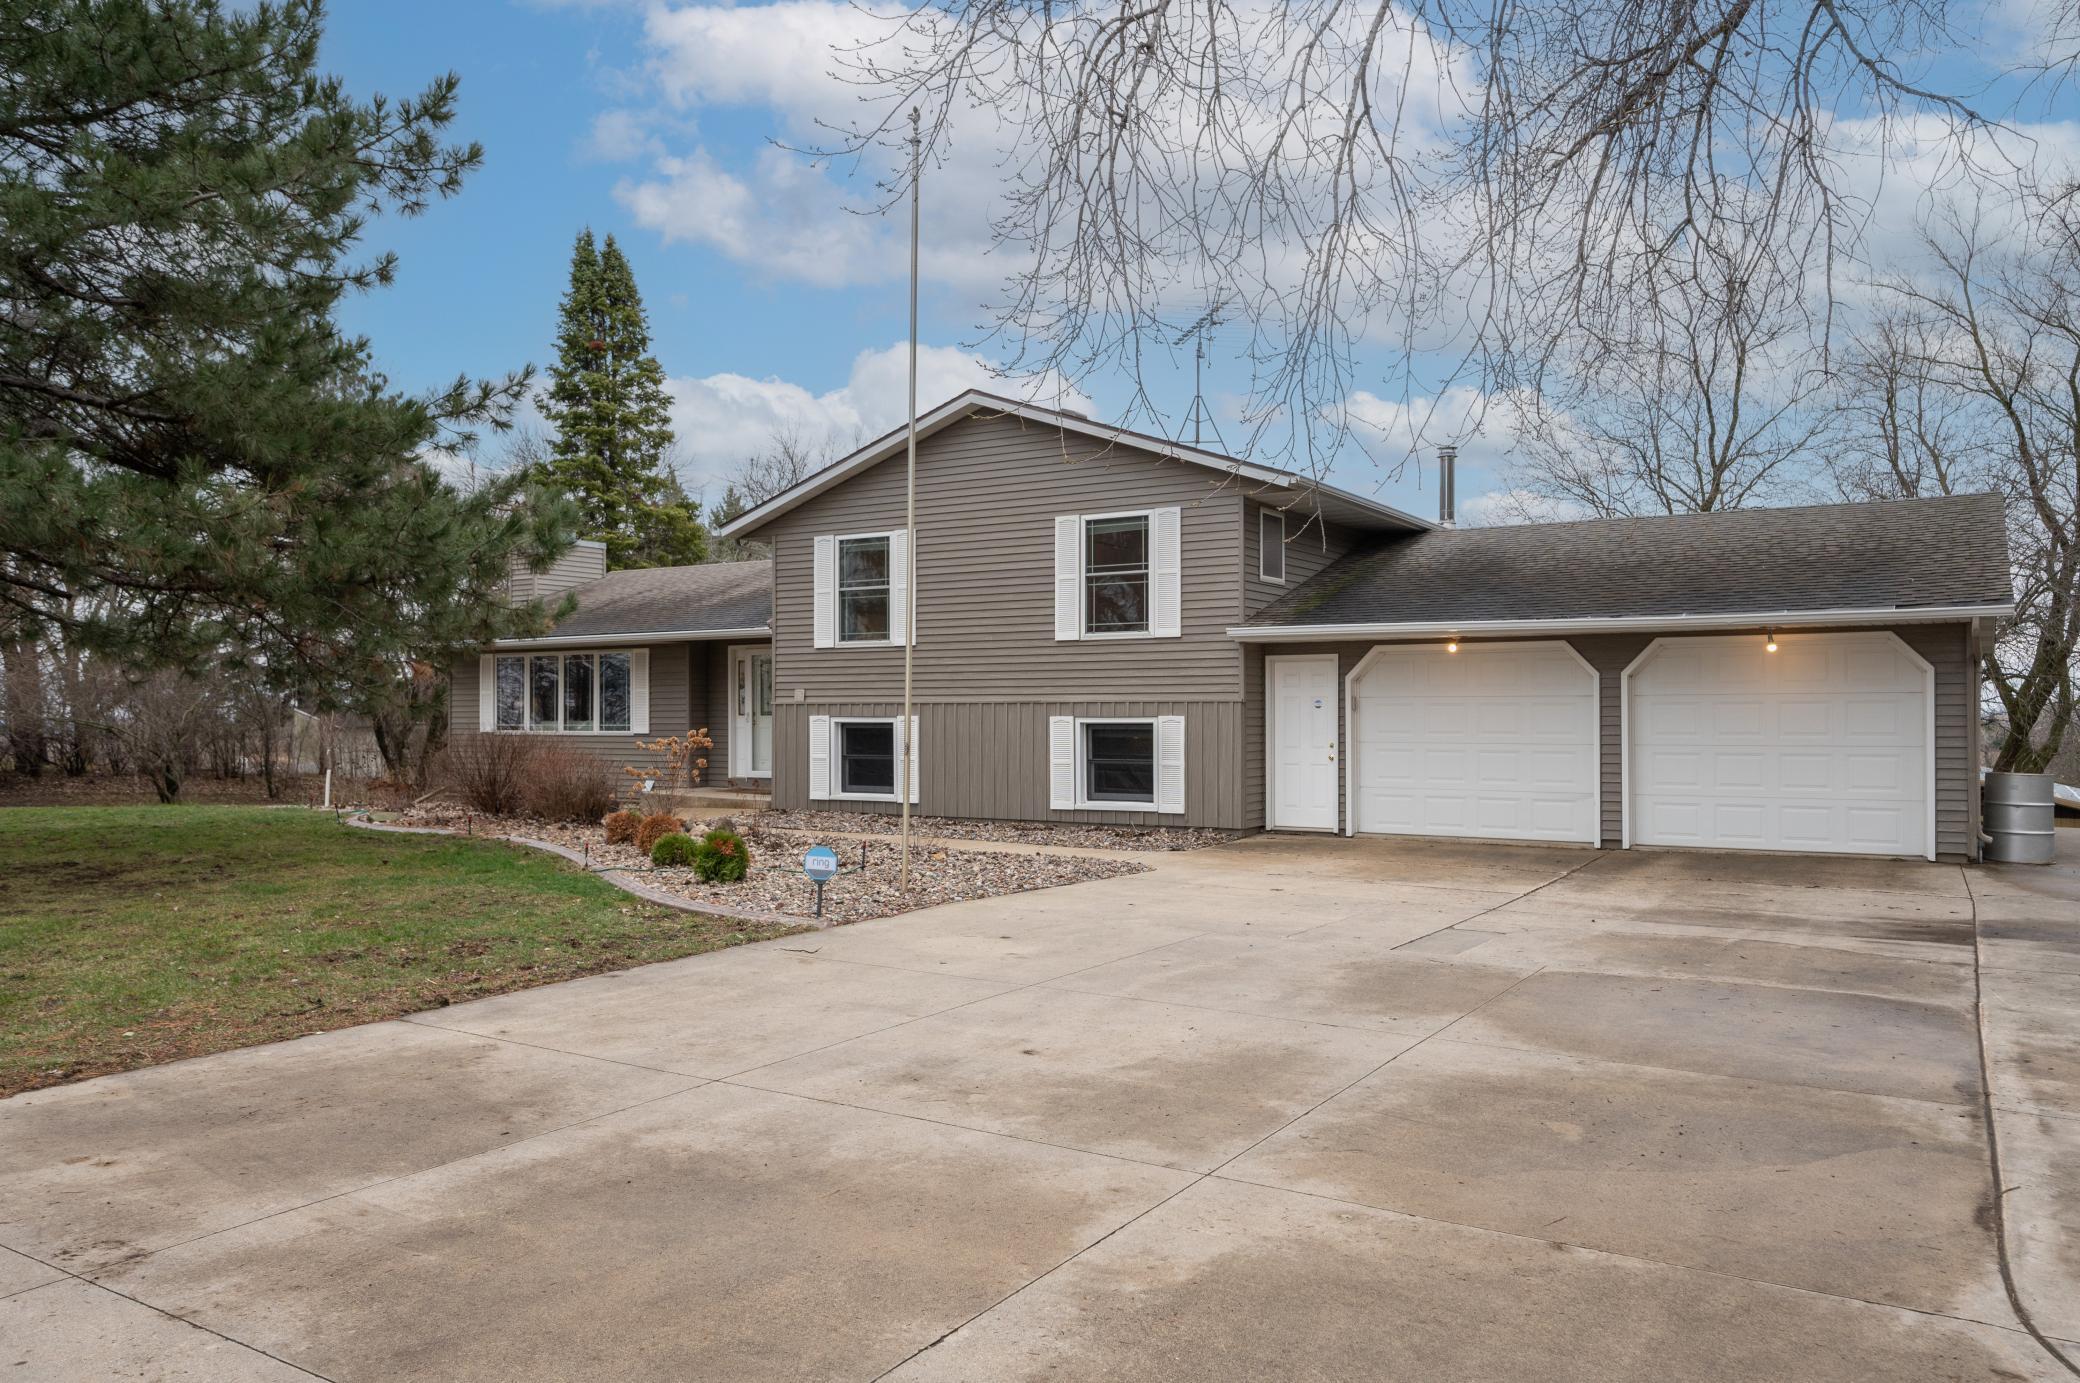 7332 Valleyhigh Road NW, Byron, MN 55920